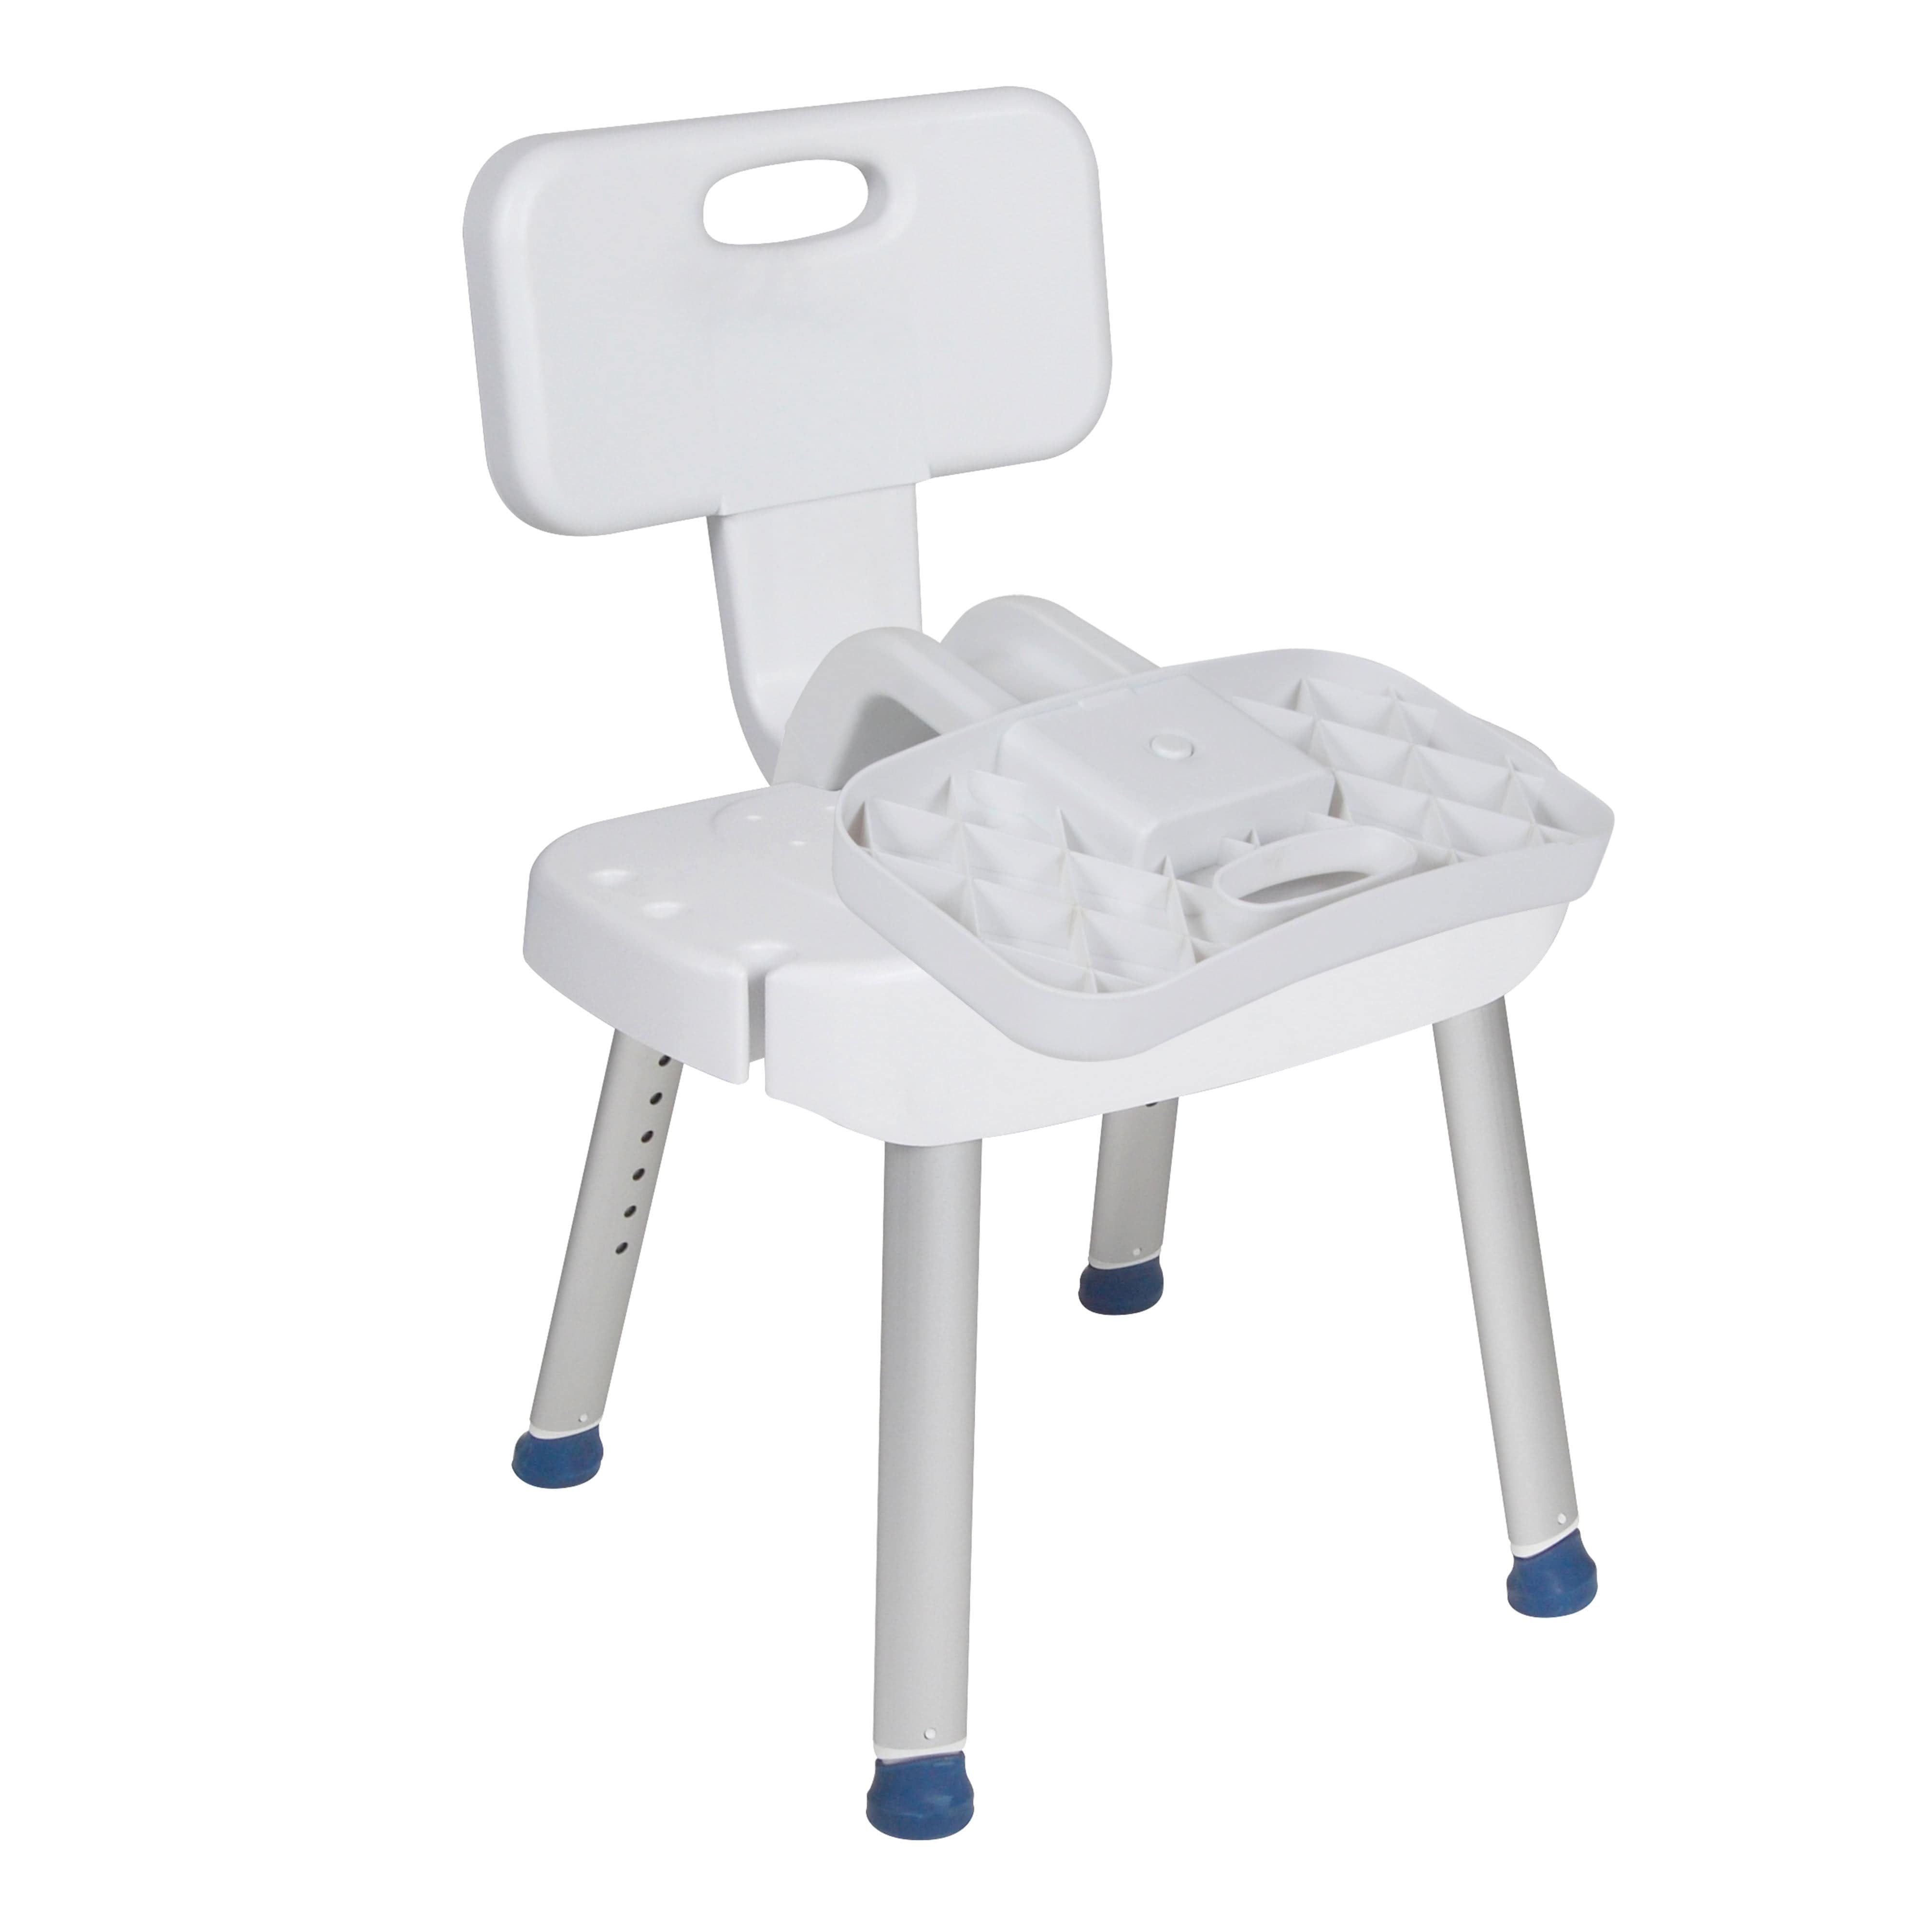 Drive Medical Bathroom Safety Drive Medical Bathroom Safety Shower Chair with Folding Back